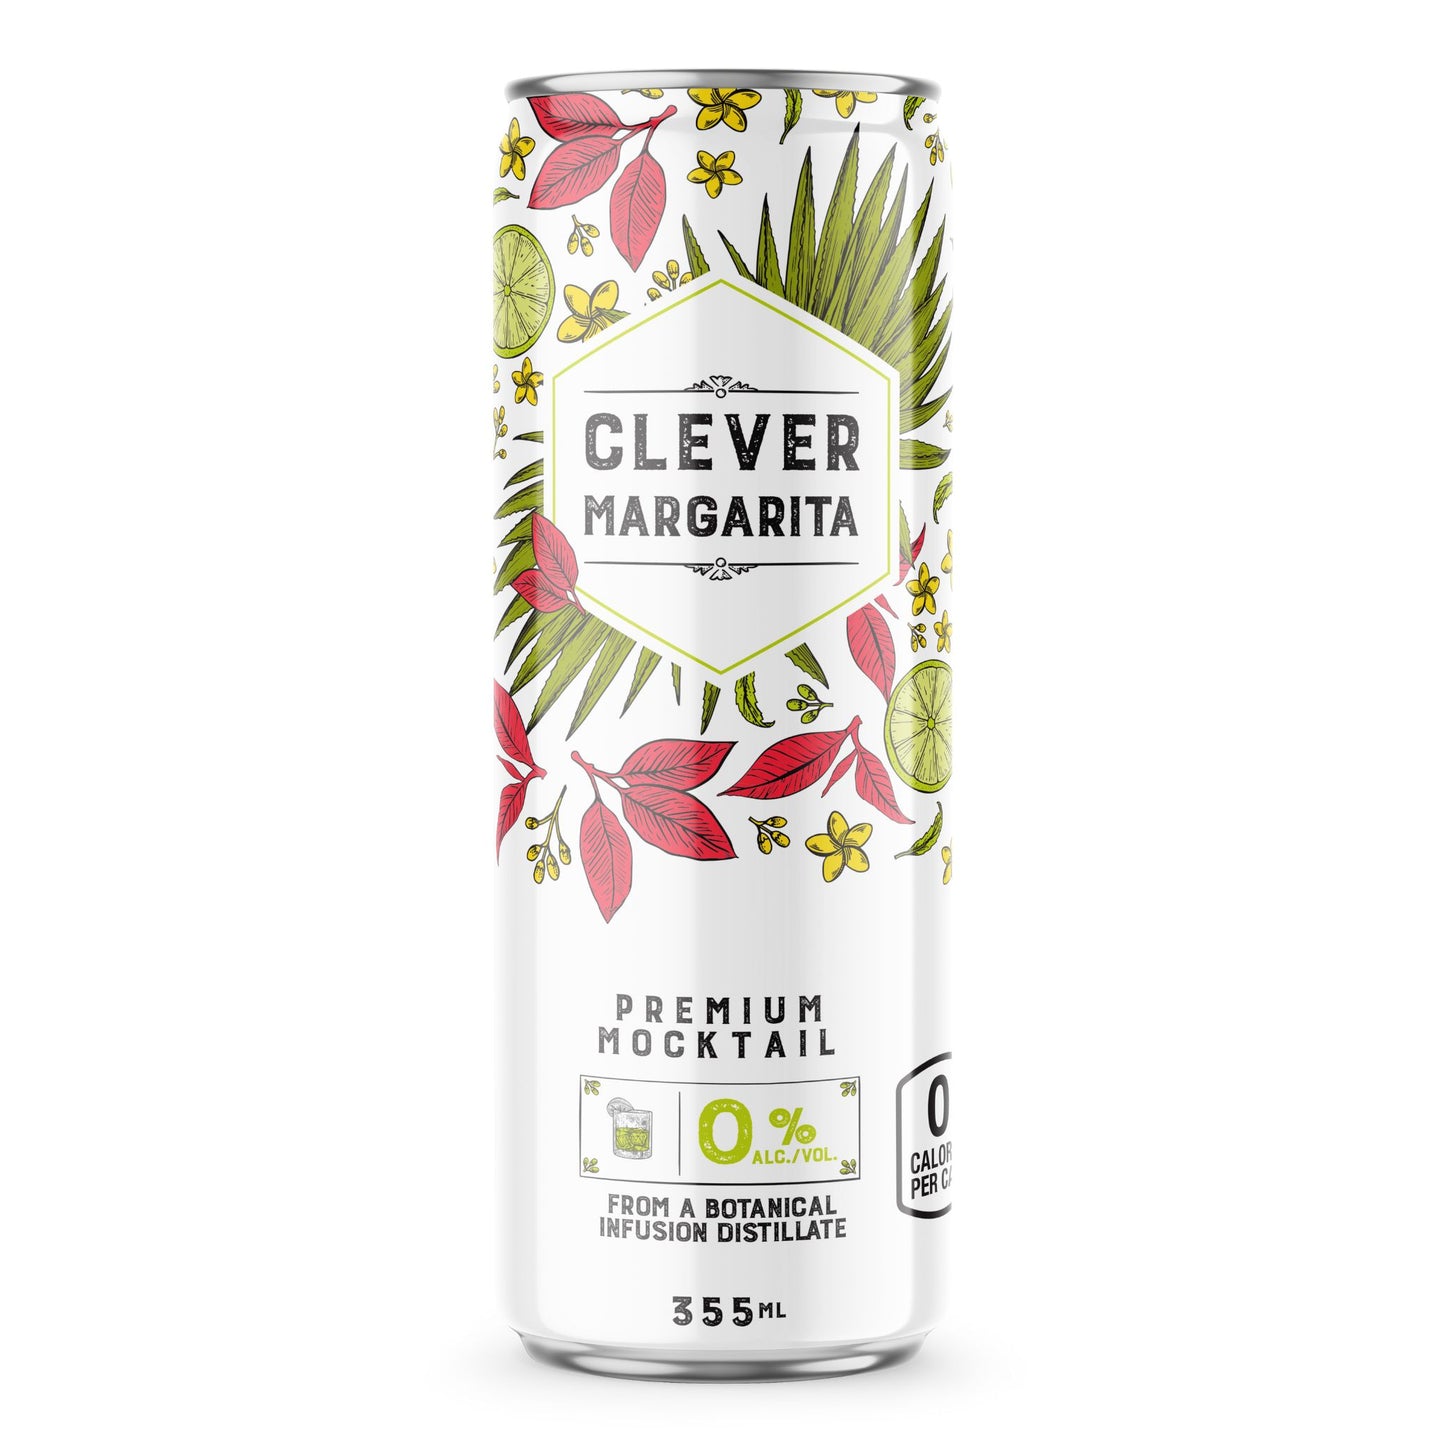 Clever Margarita Premium Mocktail is available at Knyota Non-Alcoholic Drinks.